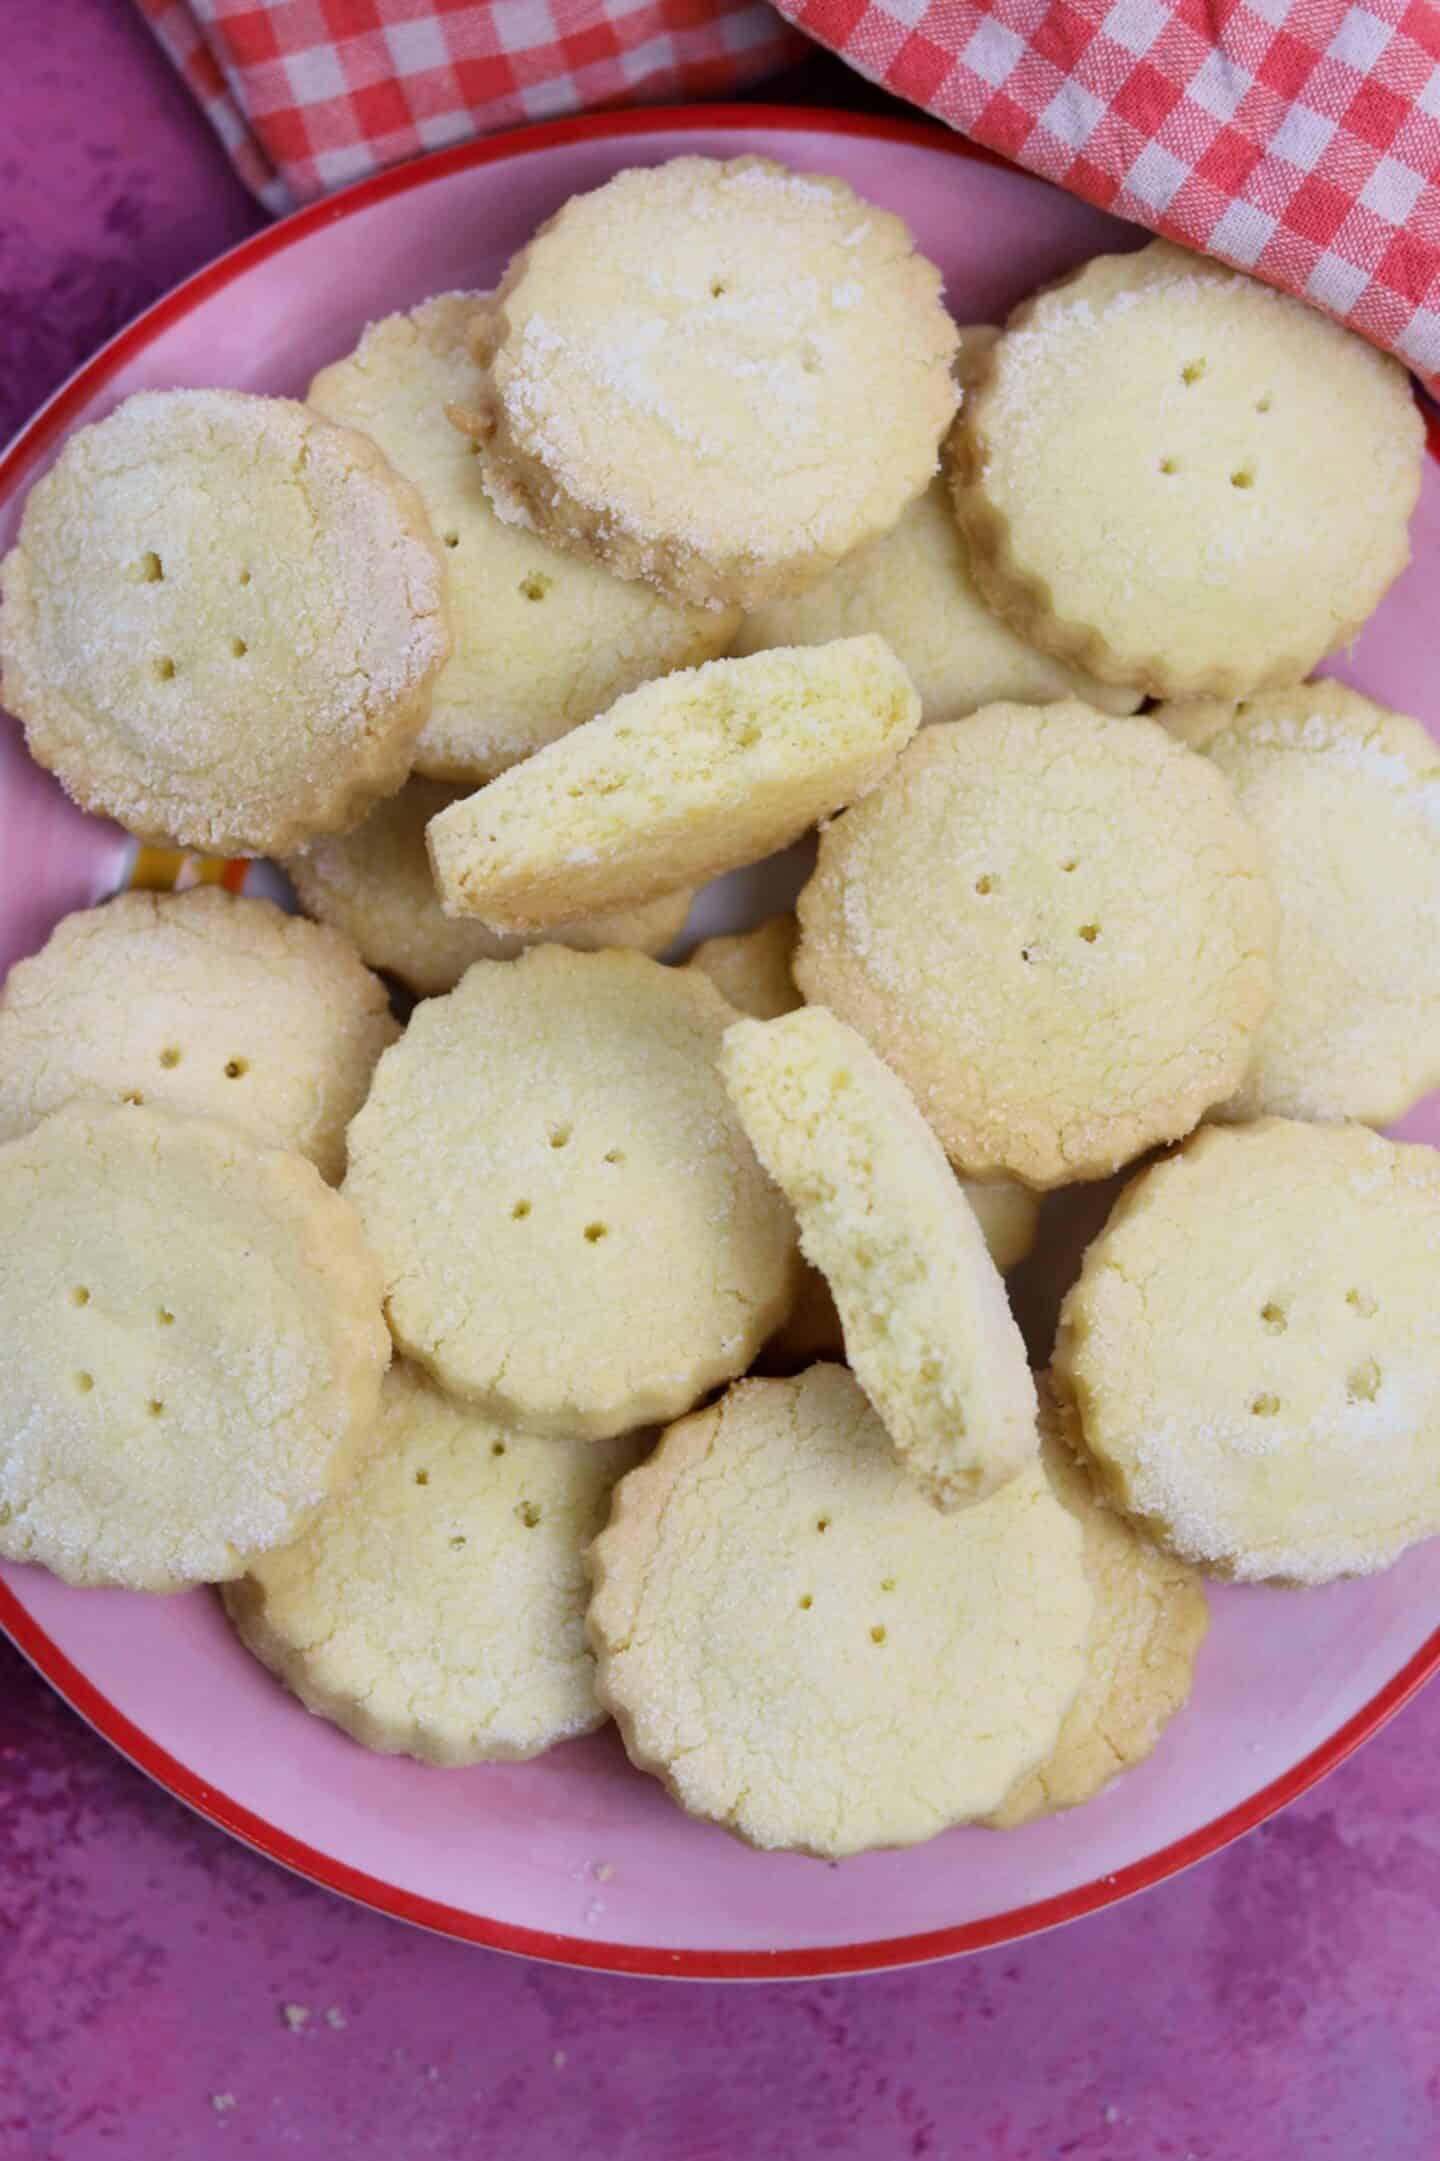 A plate of gluten free shortbread cookies.